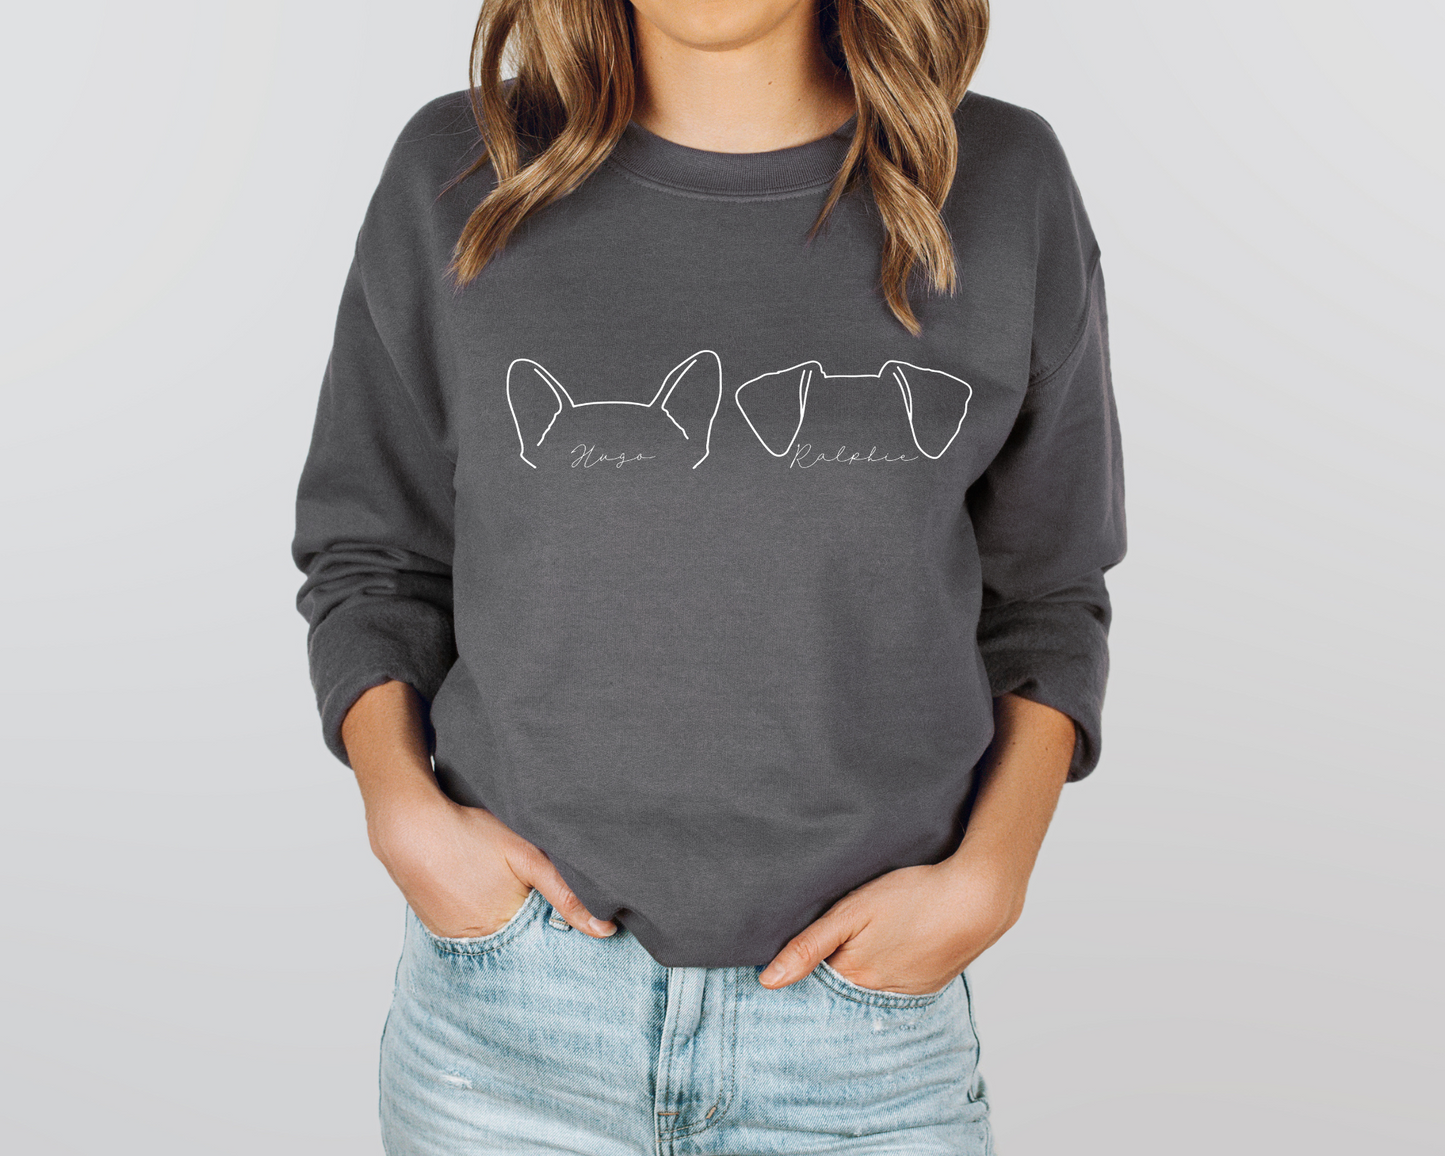 Personalised Dog Ears Jumper - Cotton Rich Range